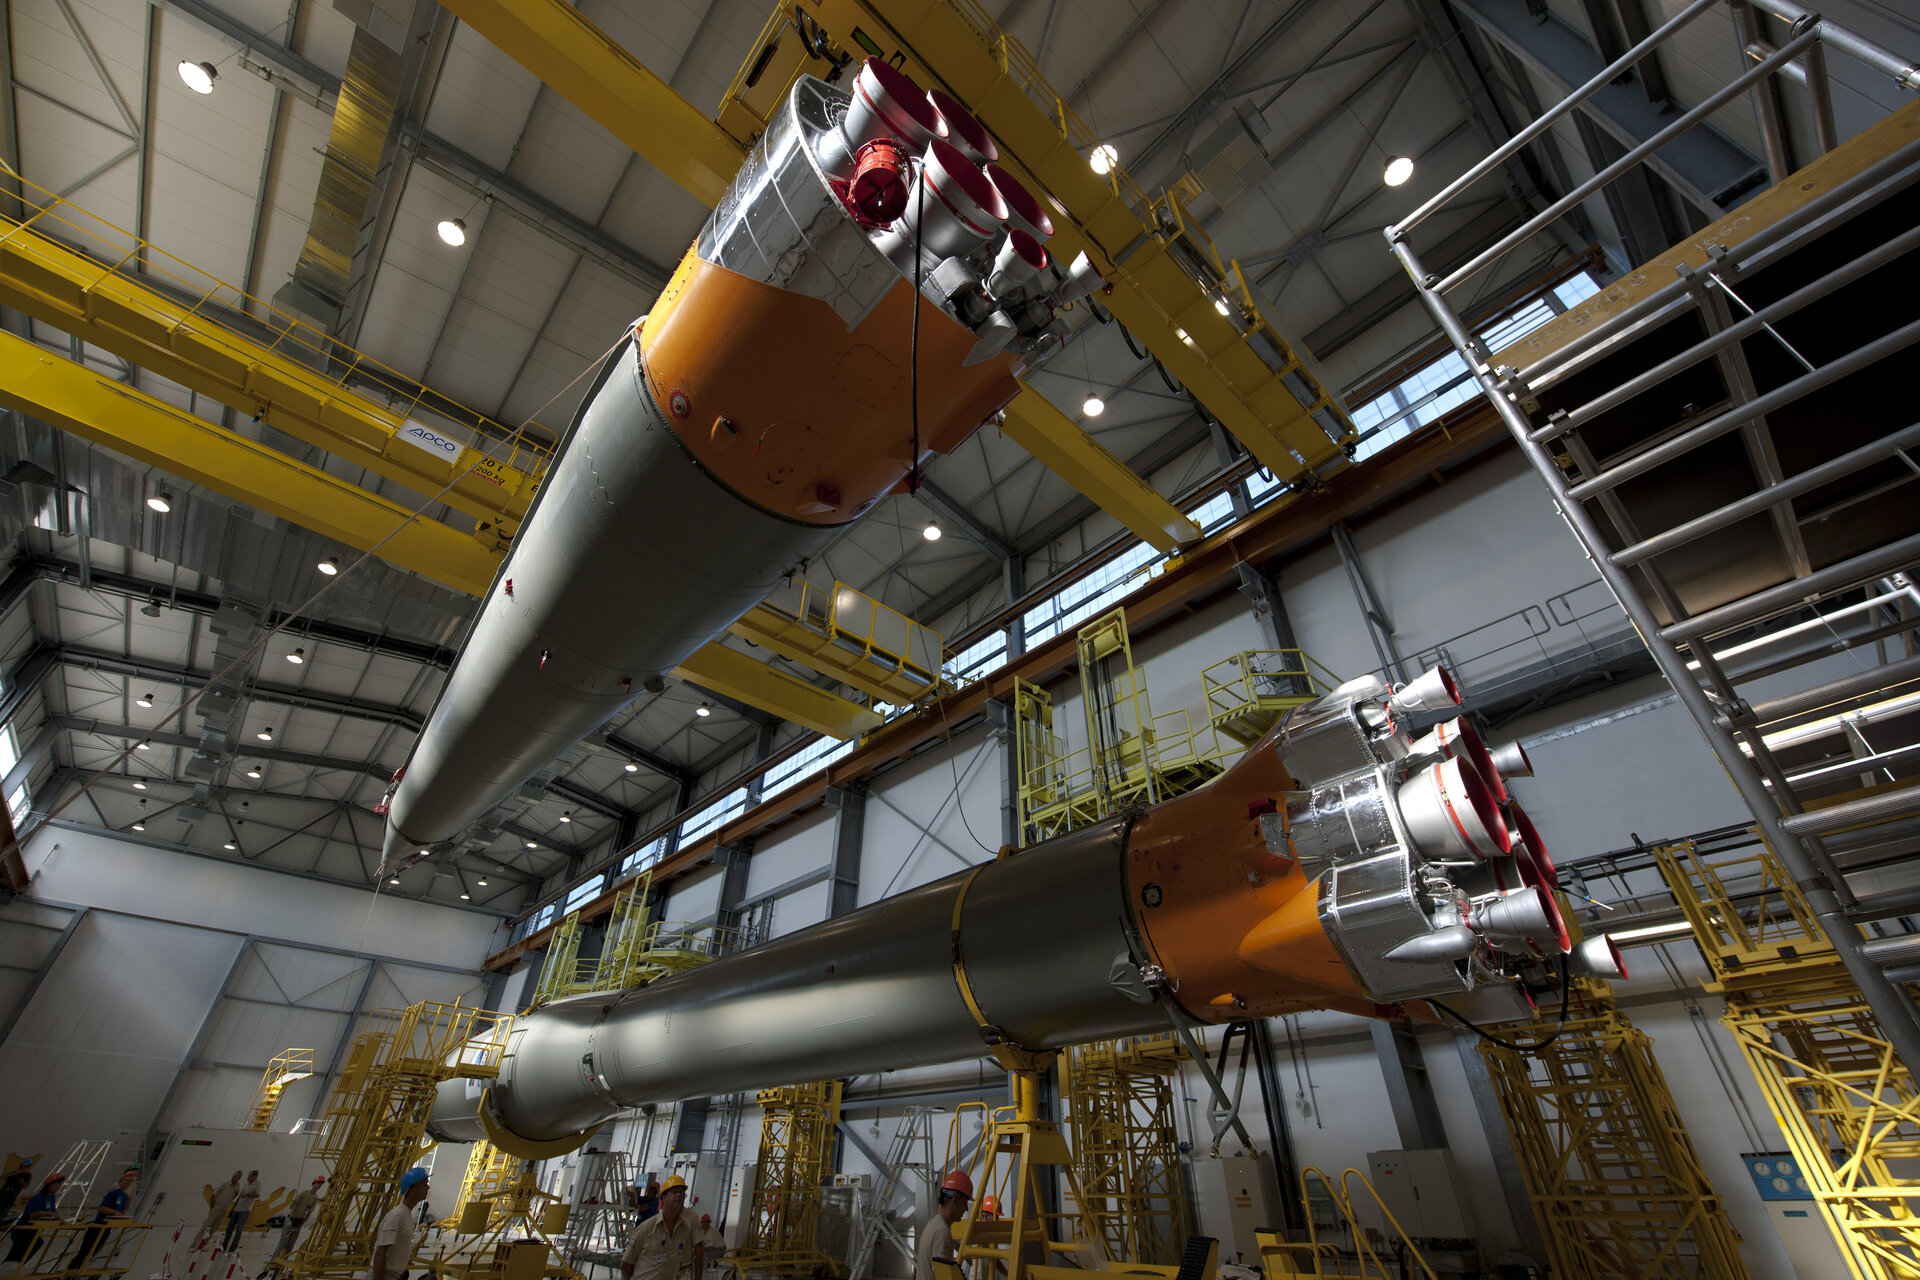 Assembly of the three-stage Soyuz